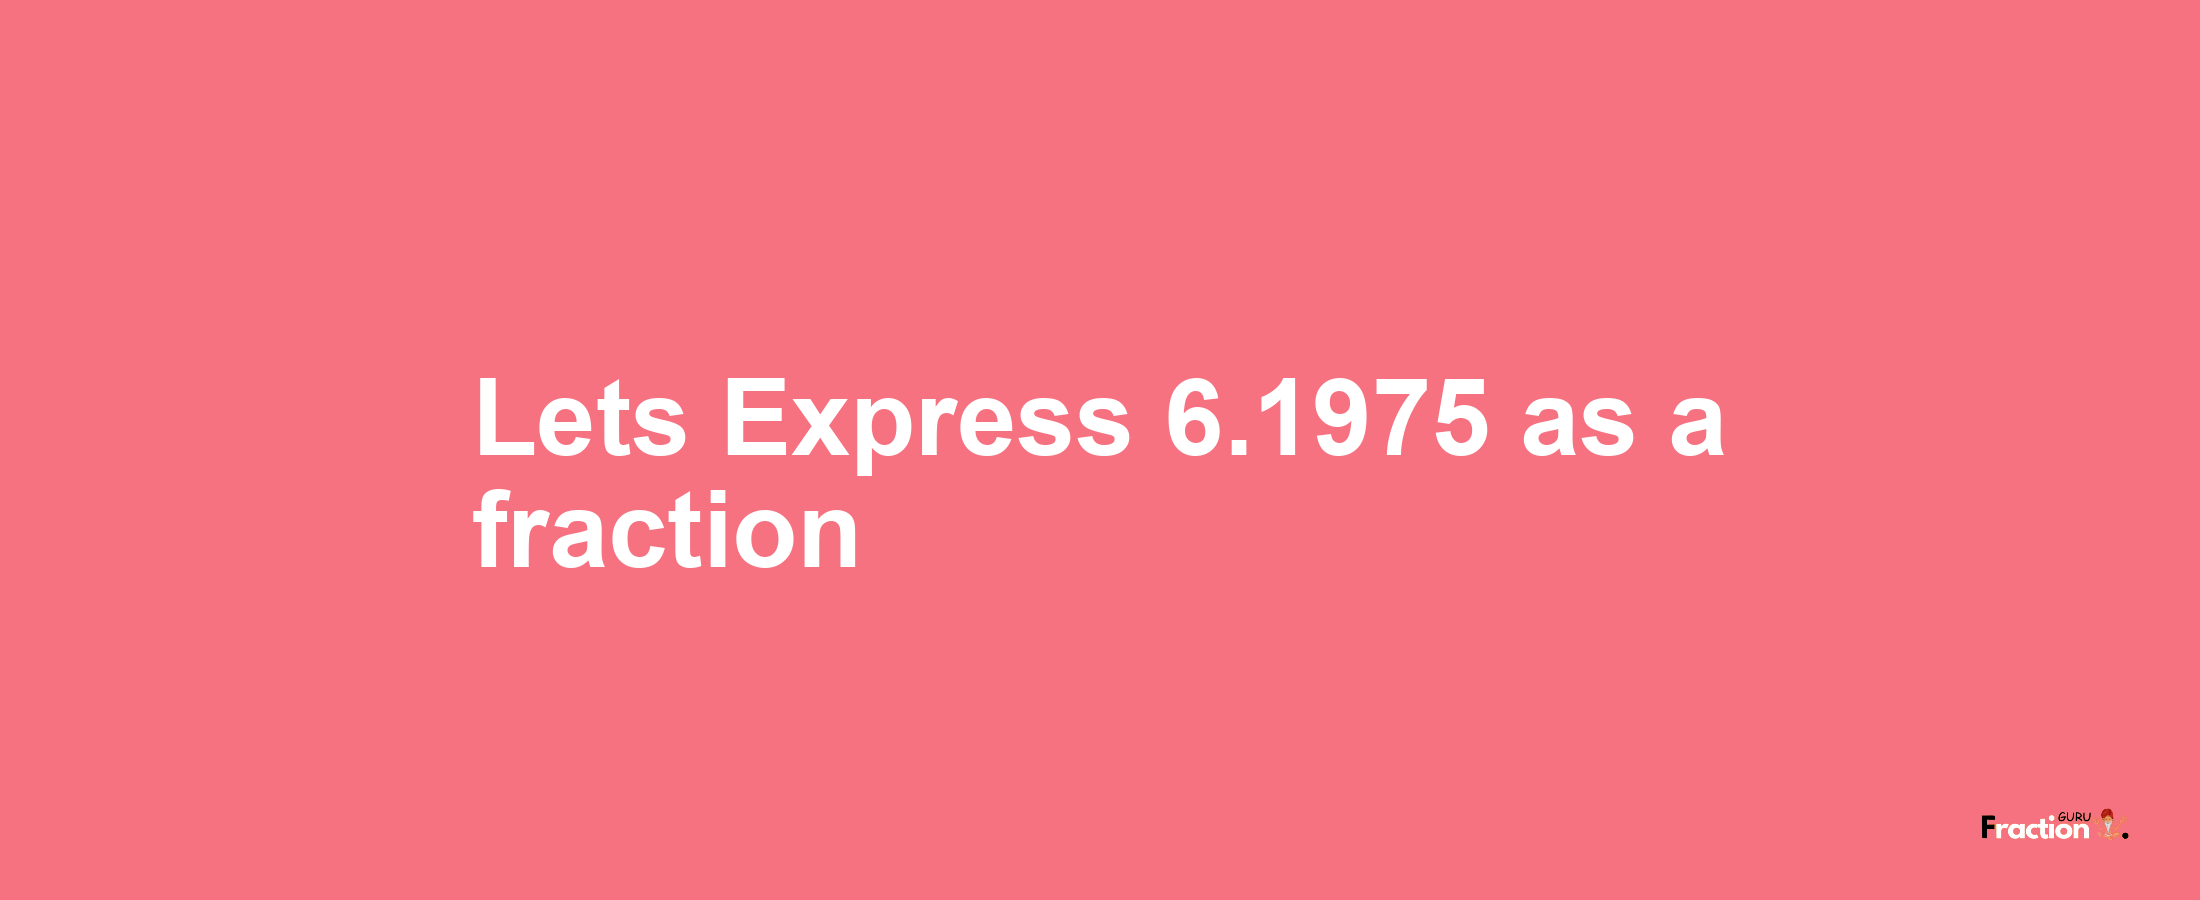 Lets Express 6.1975 as afraction